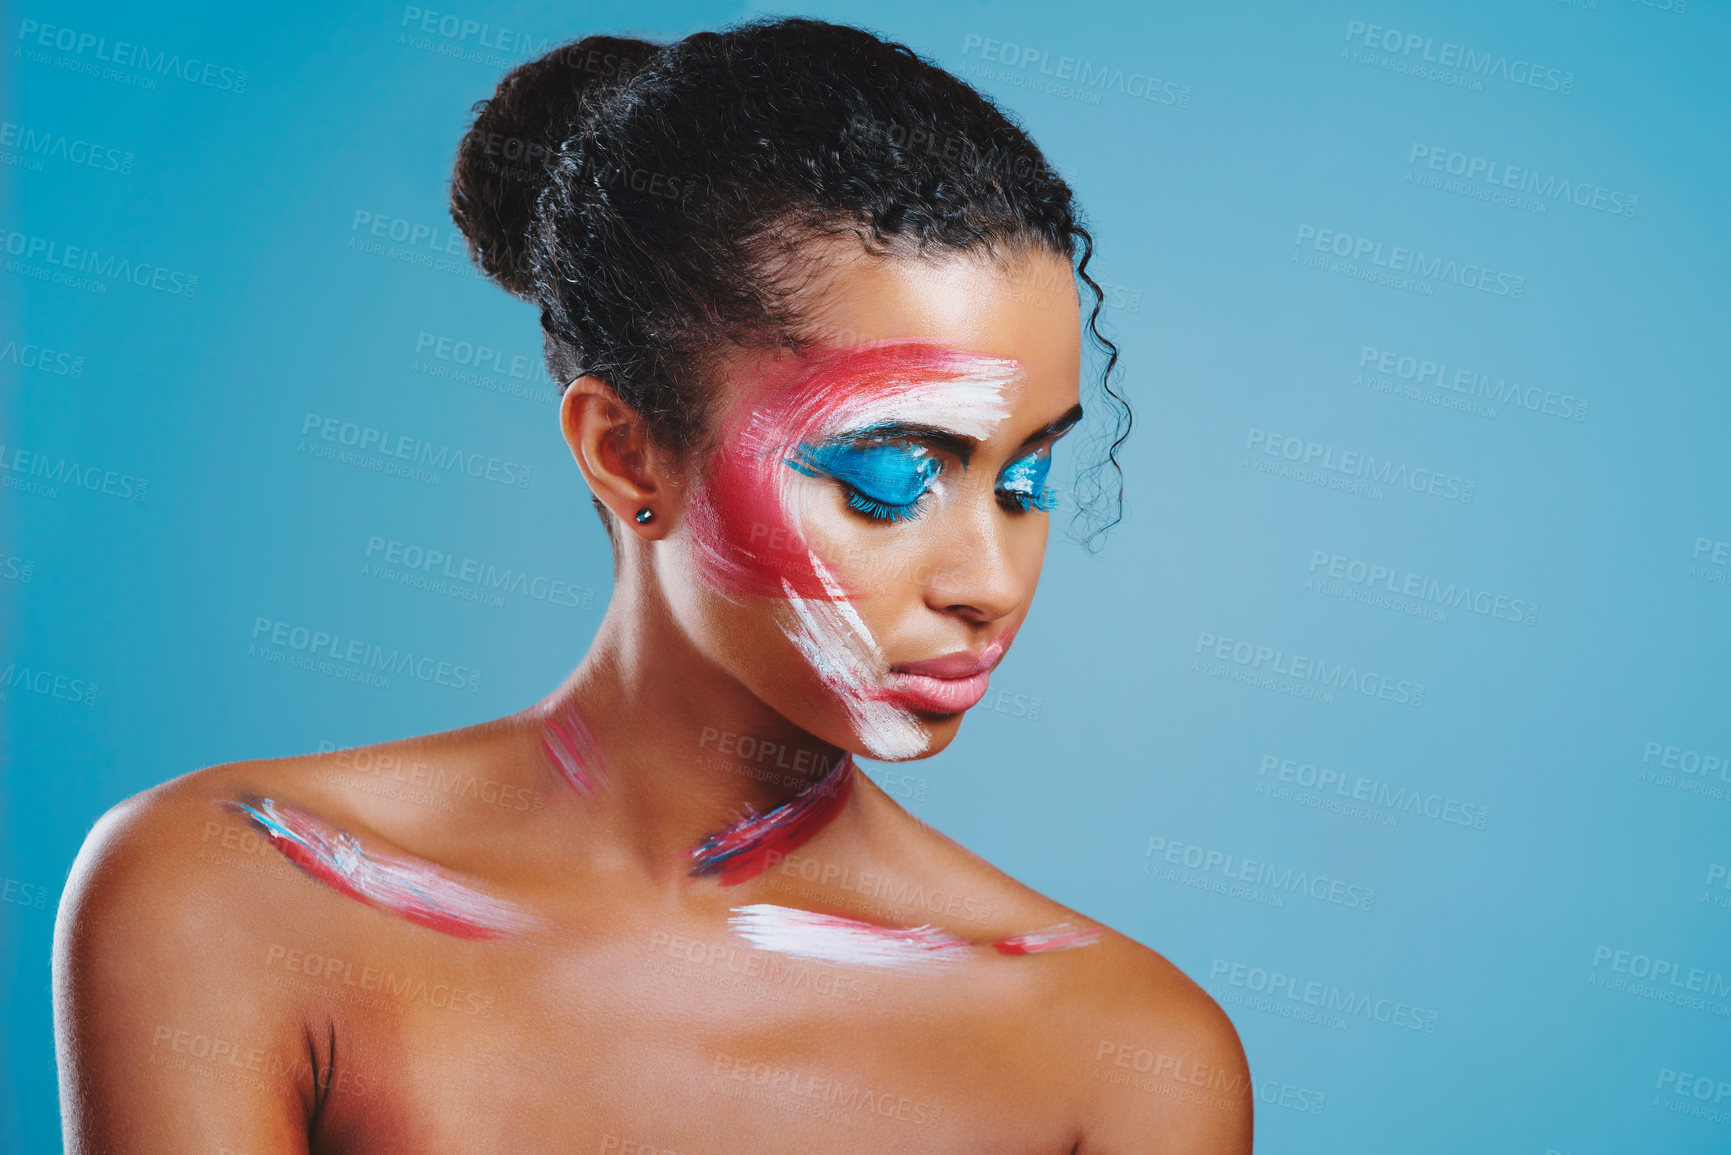 Buy stock photo Studio shot of a beautiful young woman covered in face paint posing against a blue background